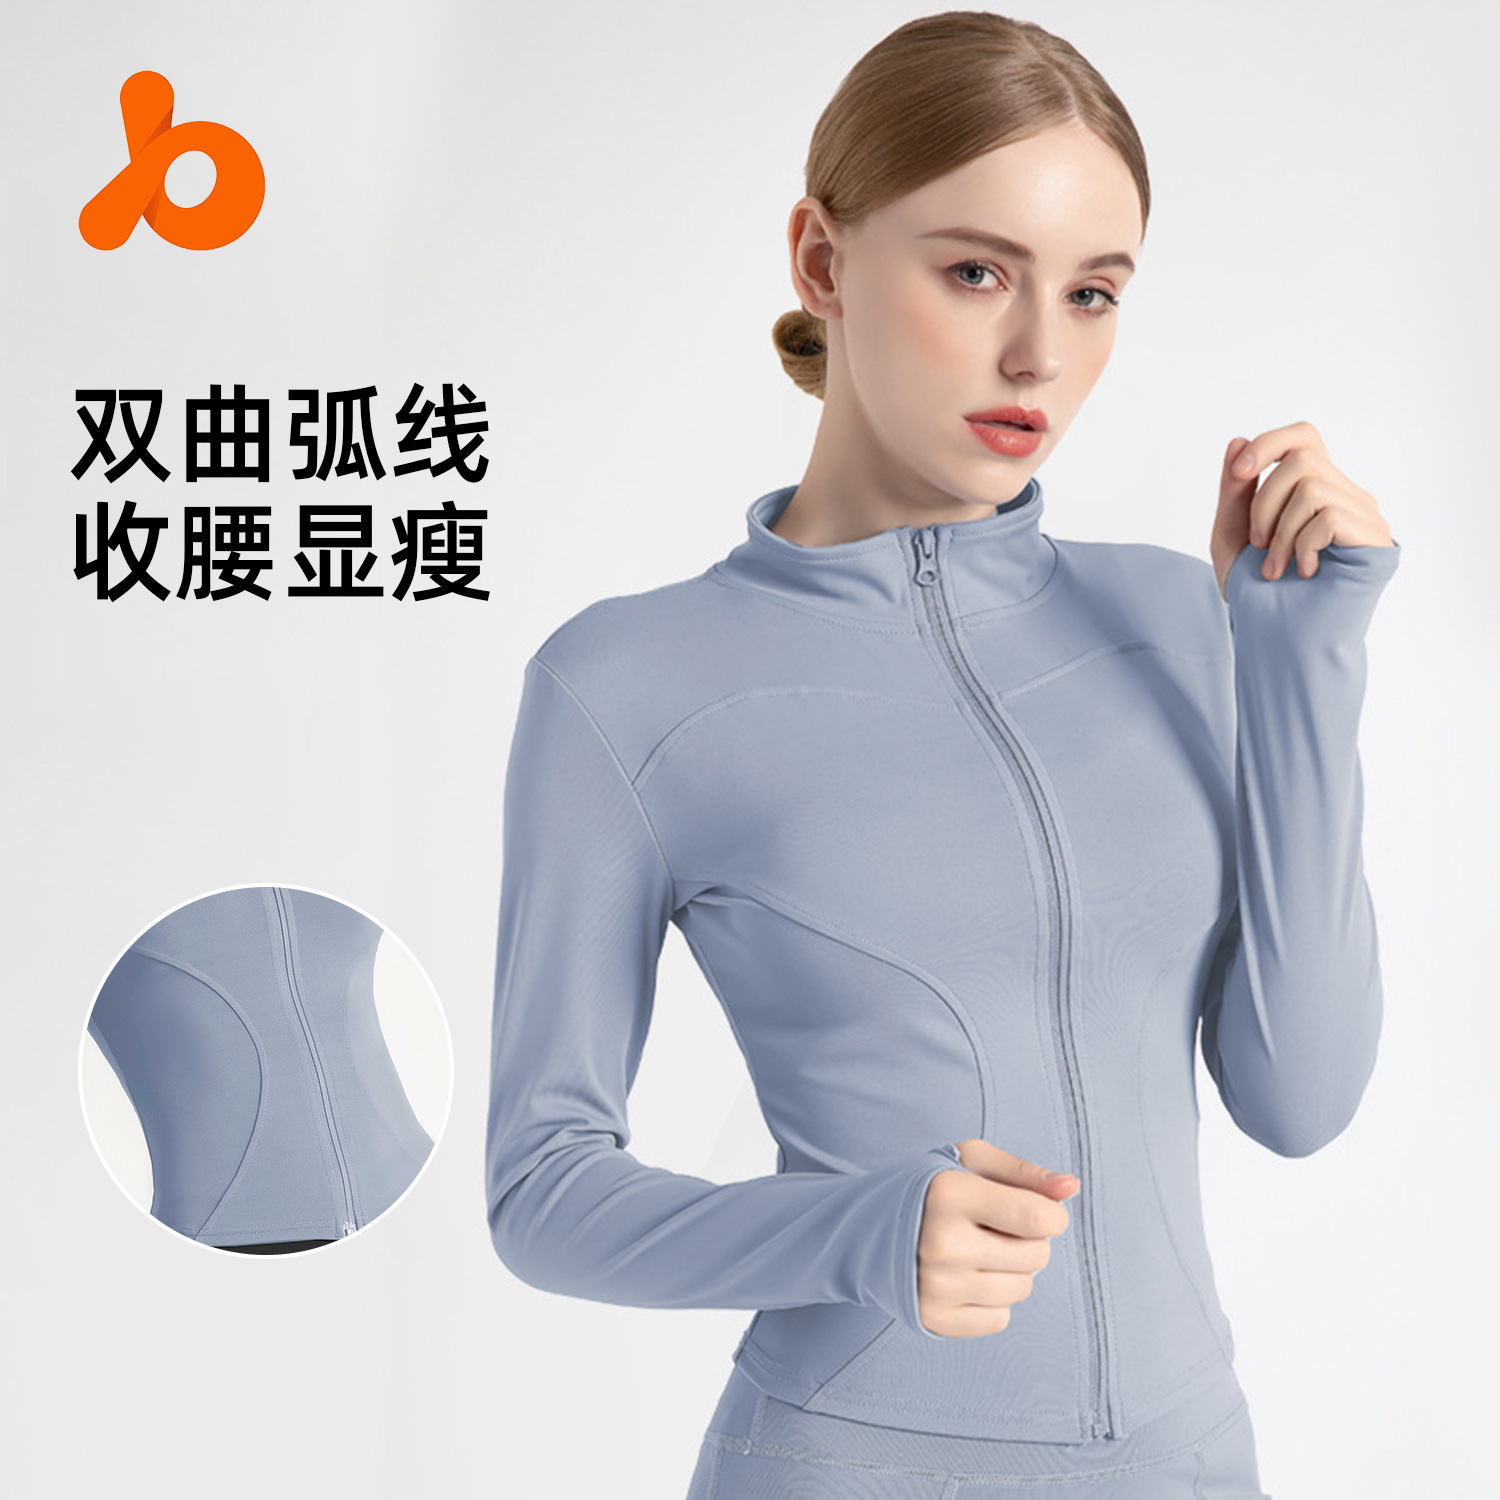 juyitang high elastic quick-drying sports jacket stand-up collar slim fit slimming yoga jacket workout clothes jacket